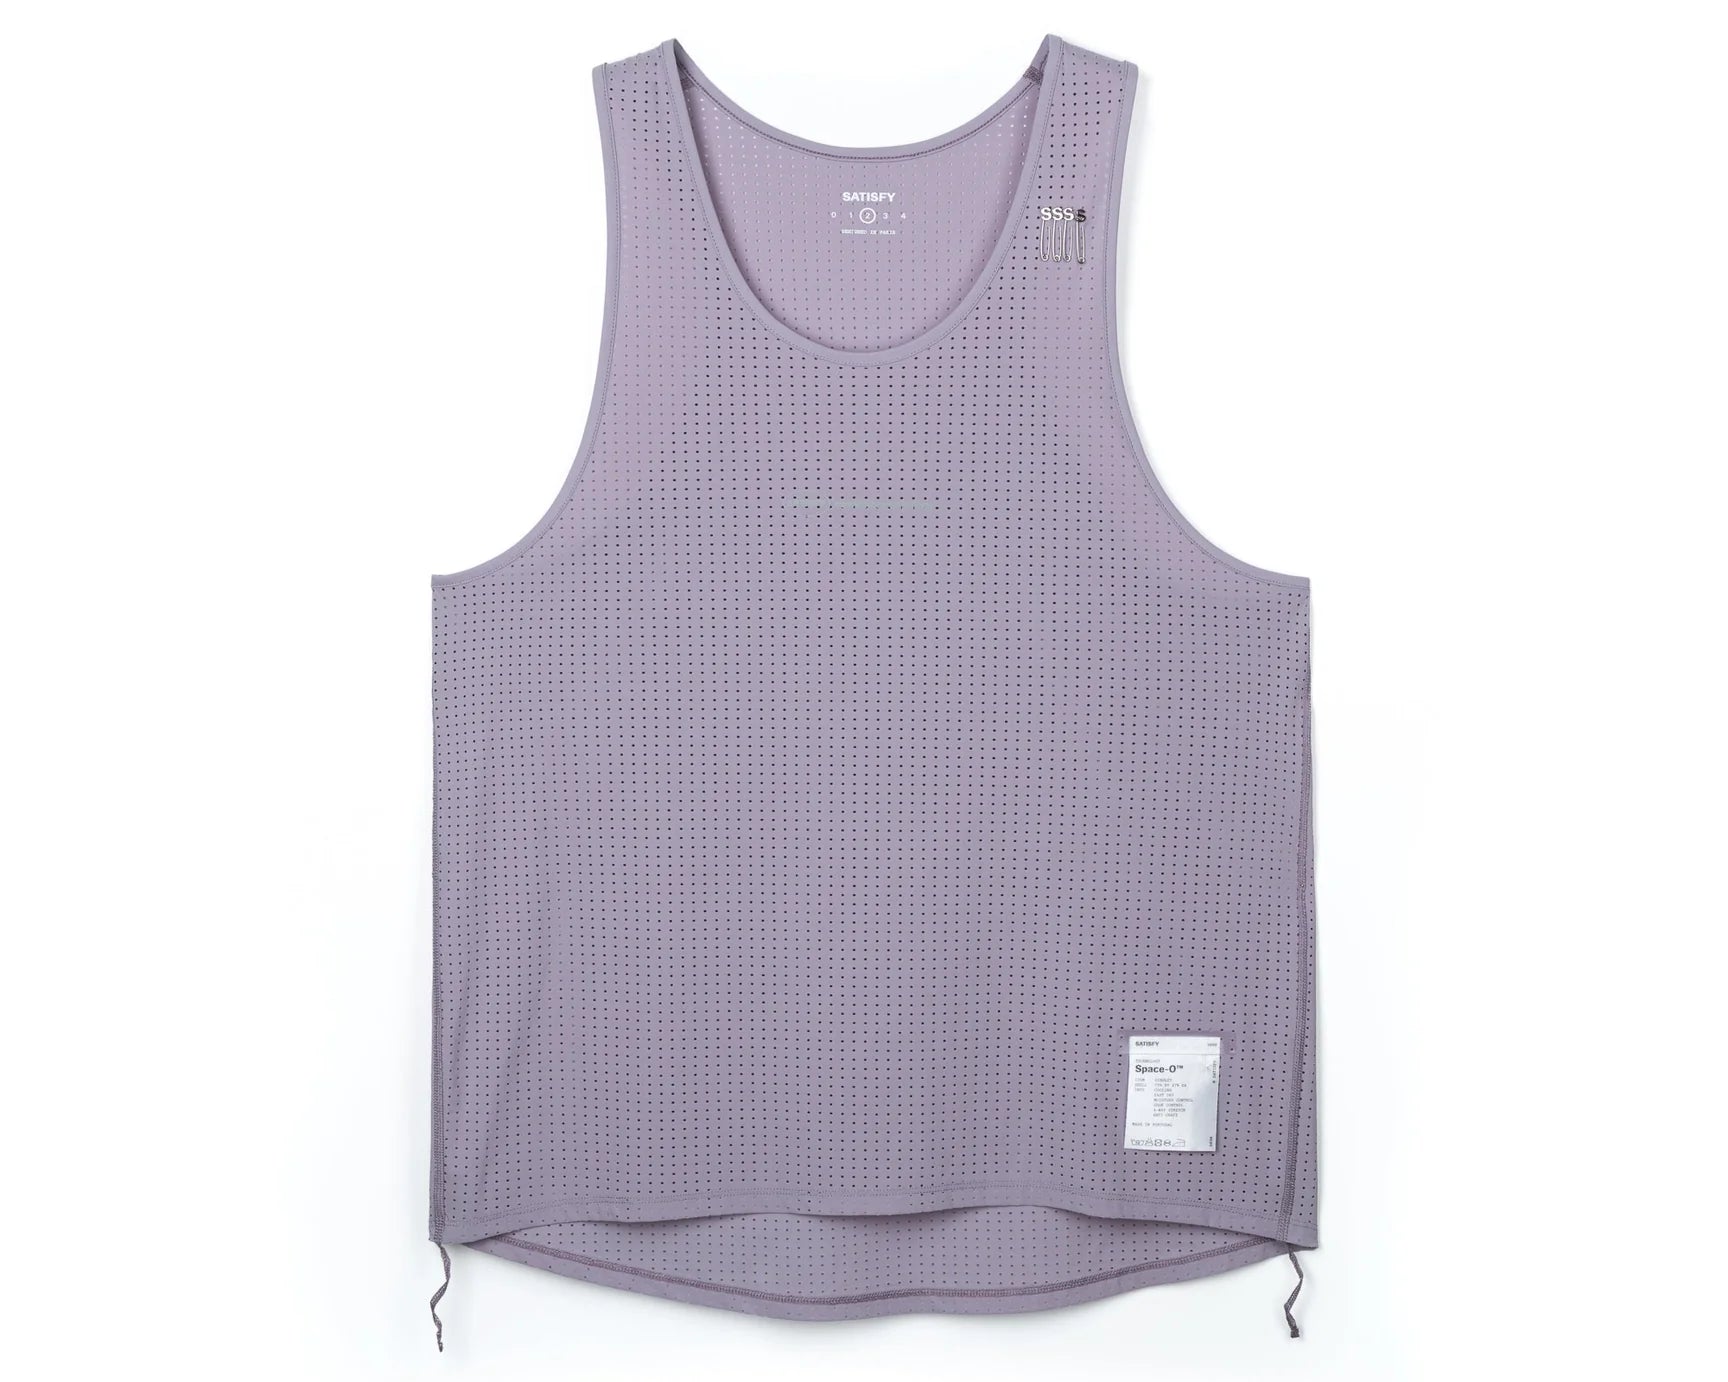 SATISFY - Space-O Singlet - Lavender Gray - Space Camp